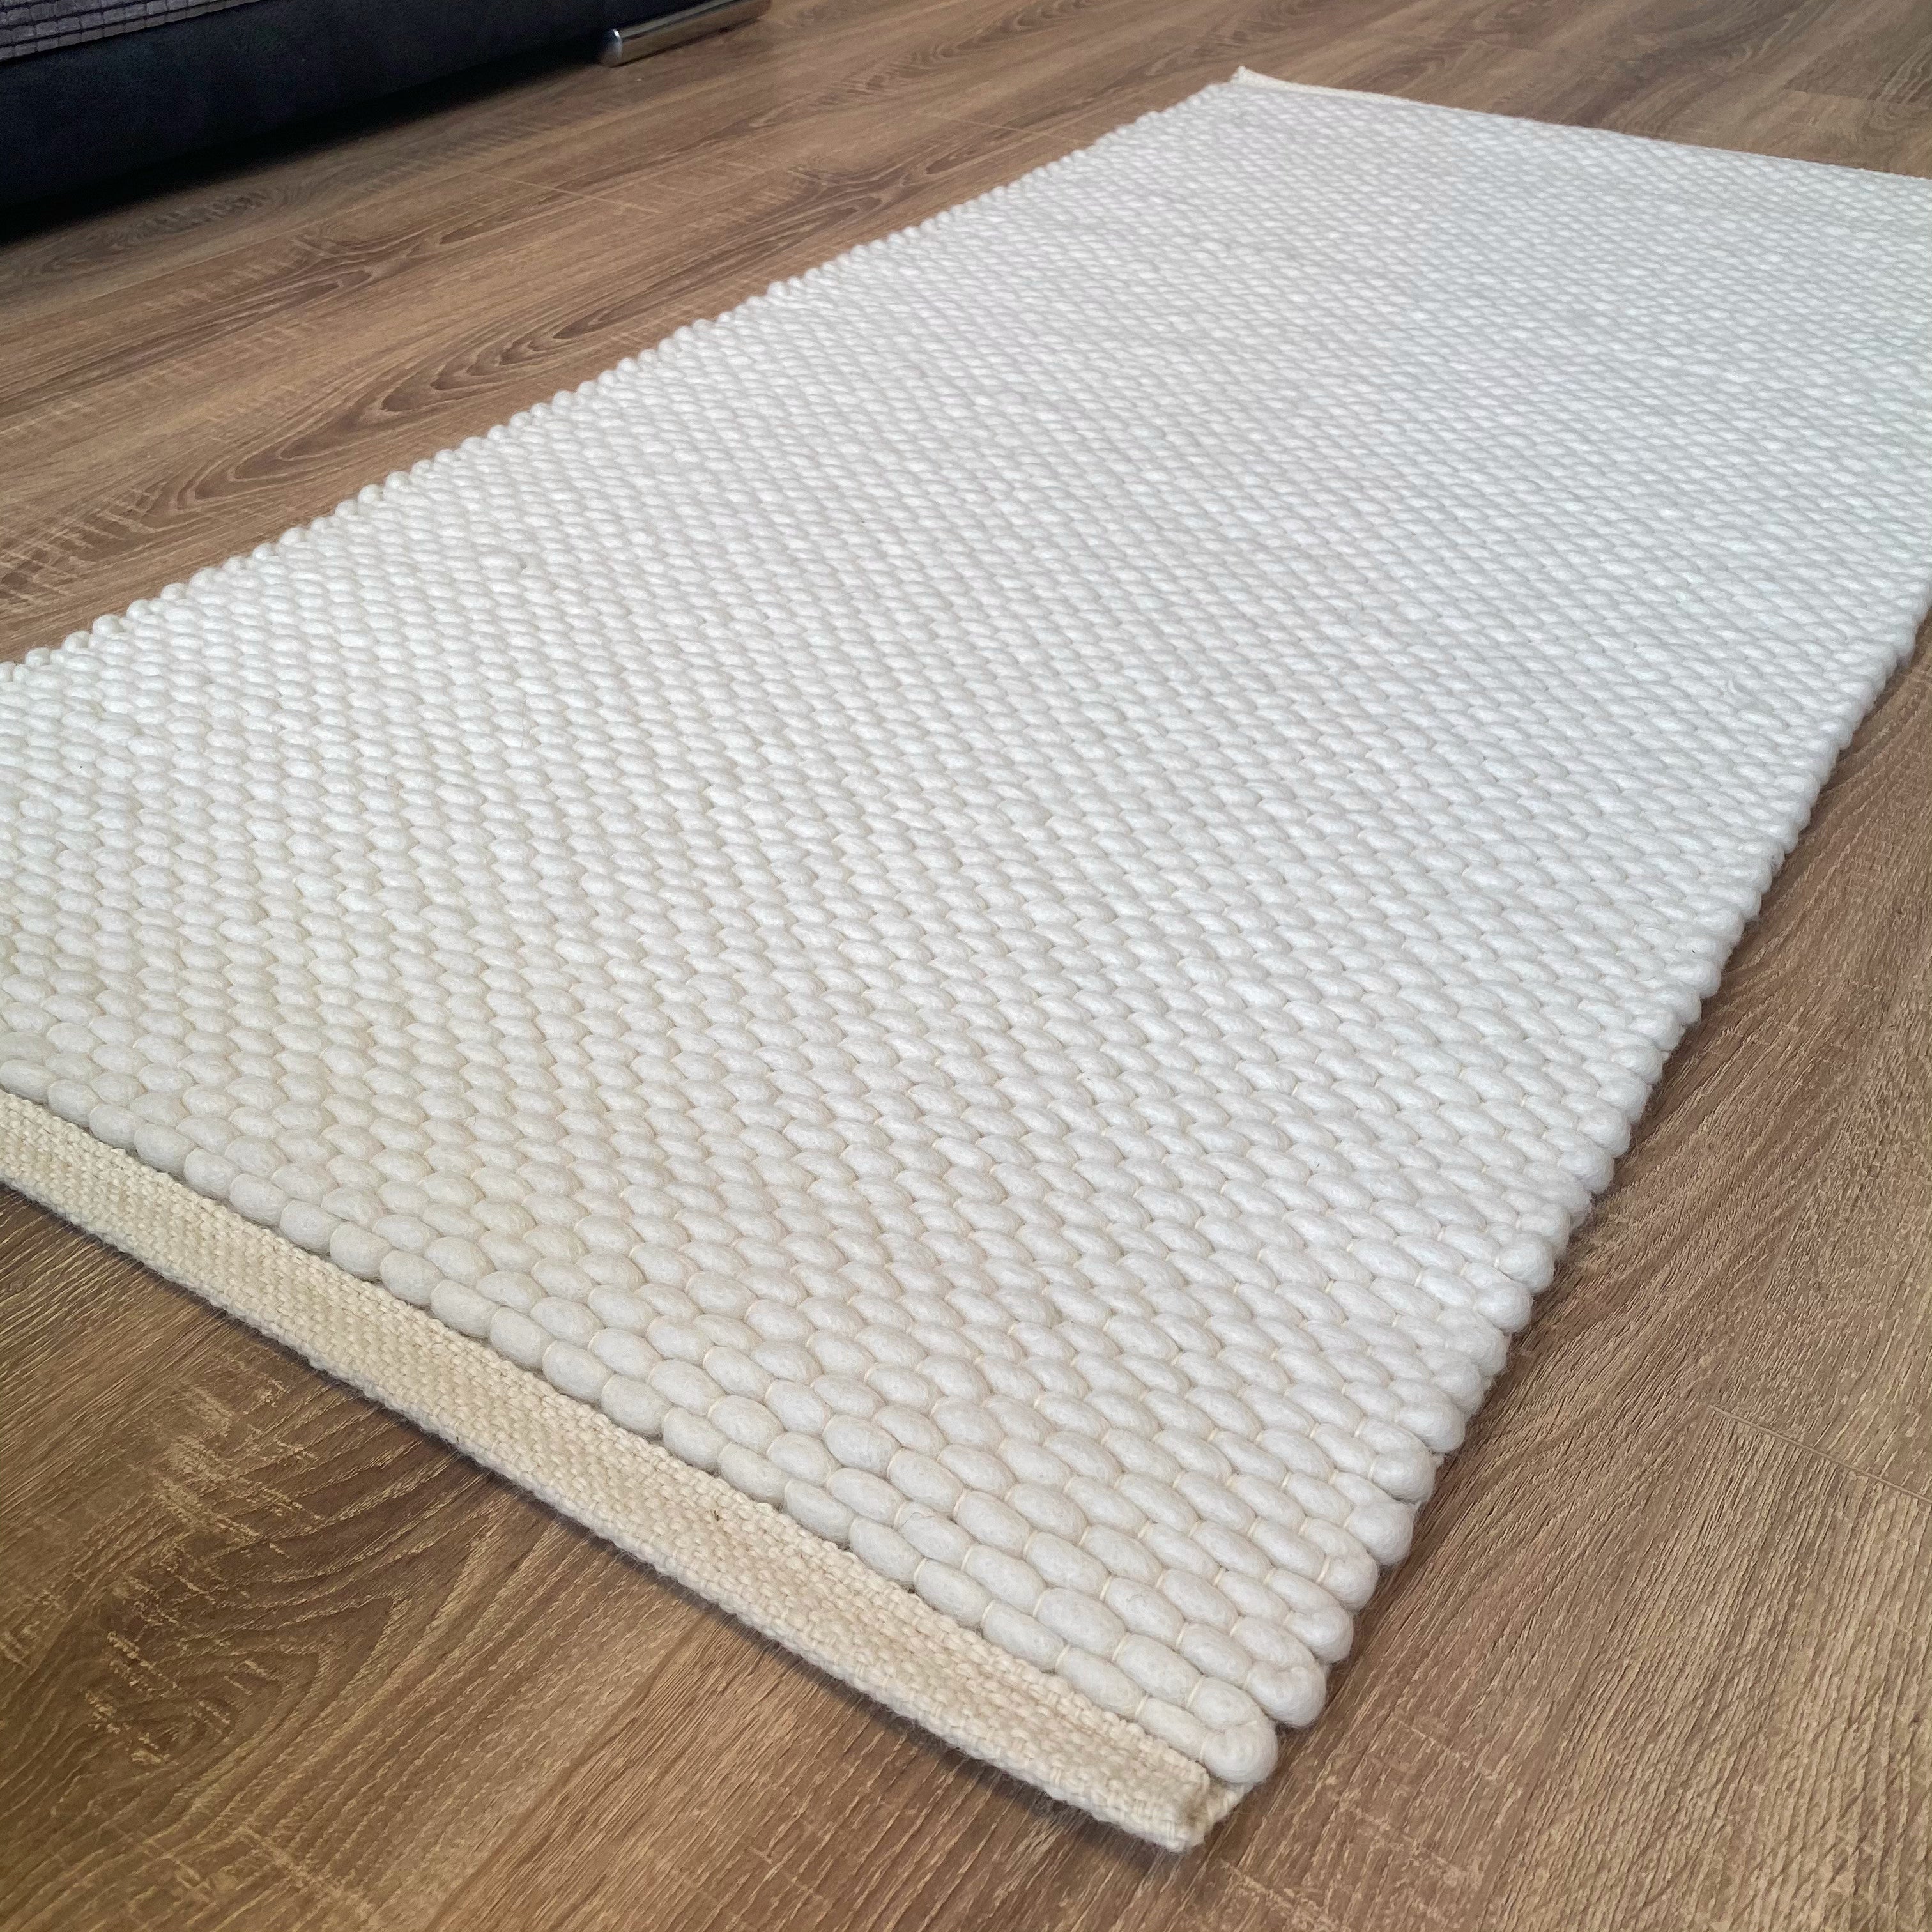 An image of Hermes Hand Woven Wool Rug Thick Loom - Natural 70x140cm